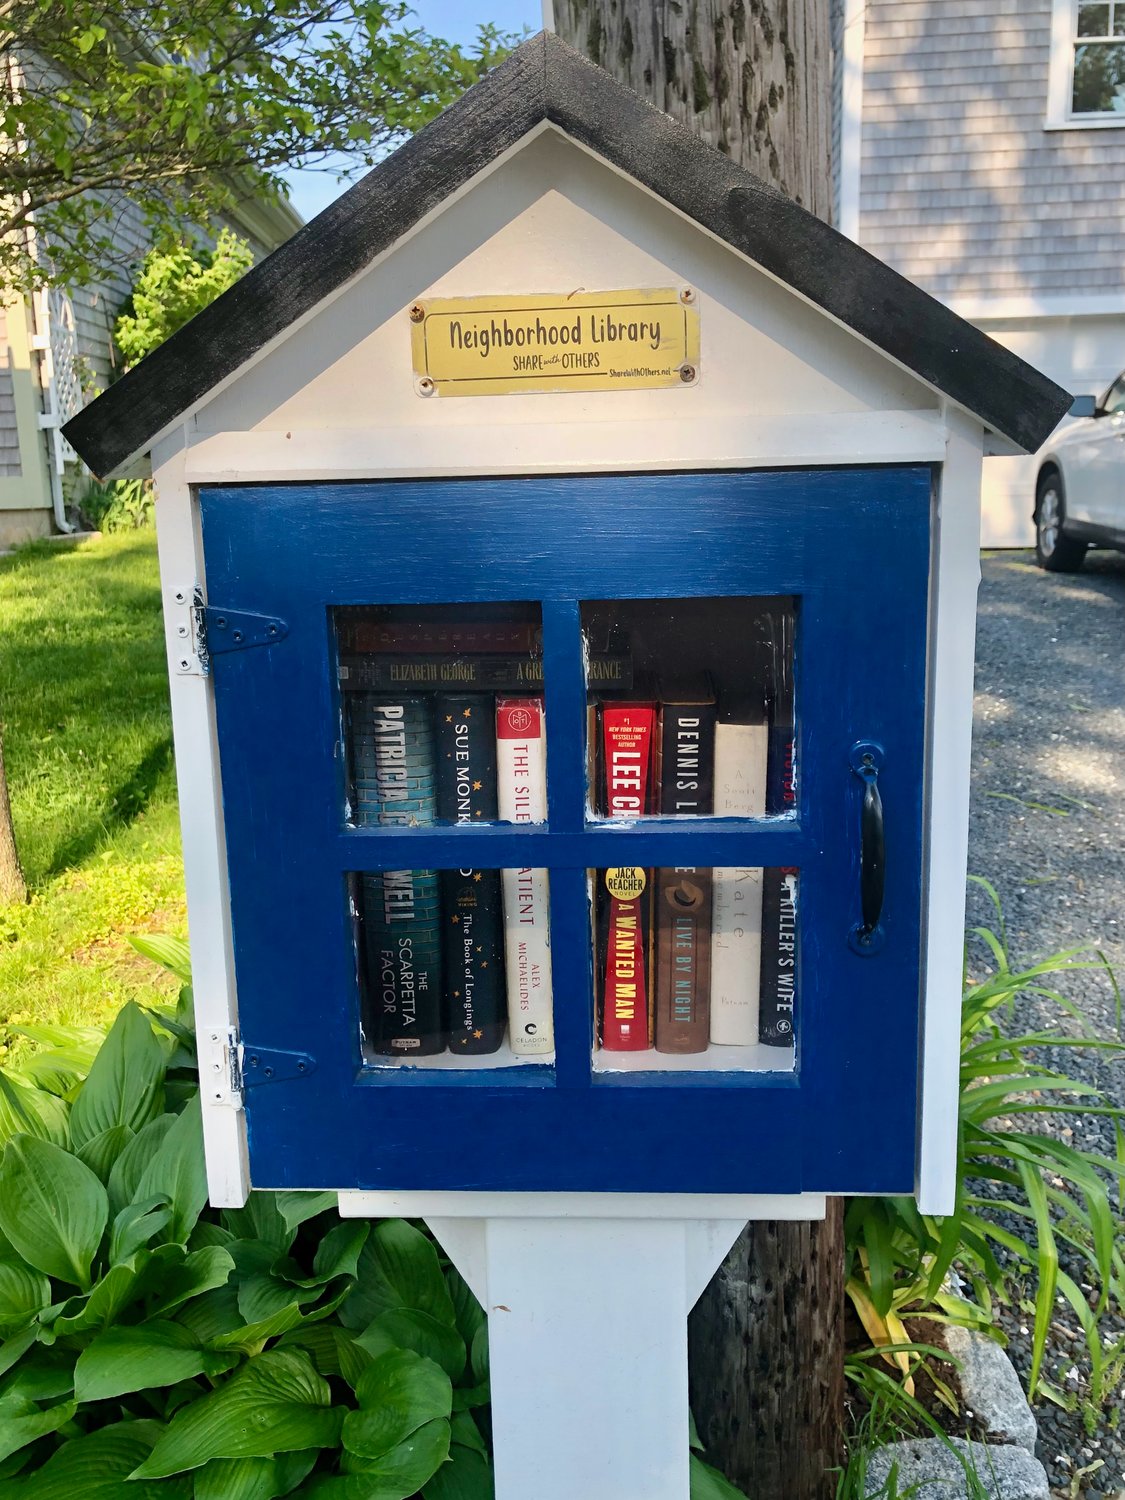 This little library was recently installed on Cliff Avenue at the Hummocks.